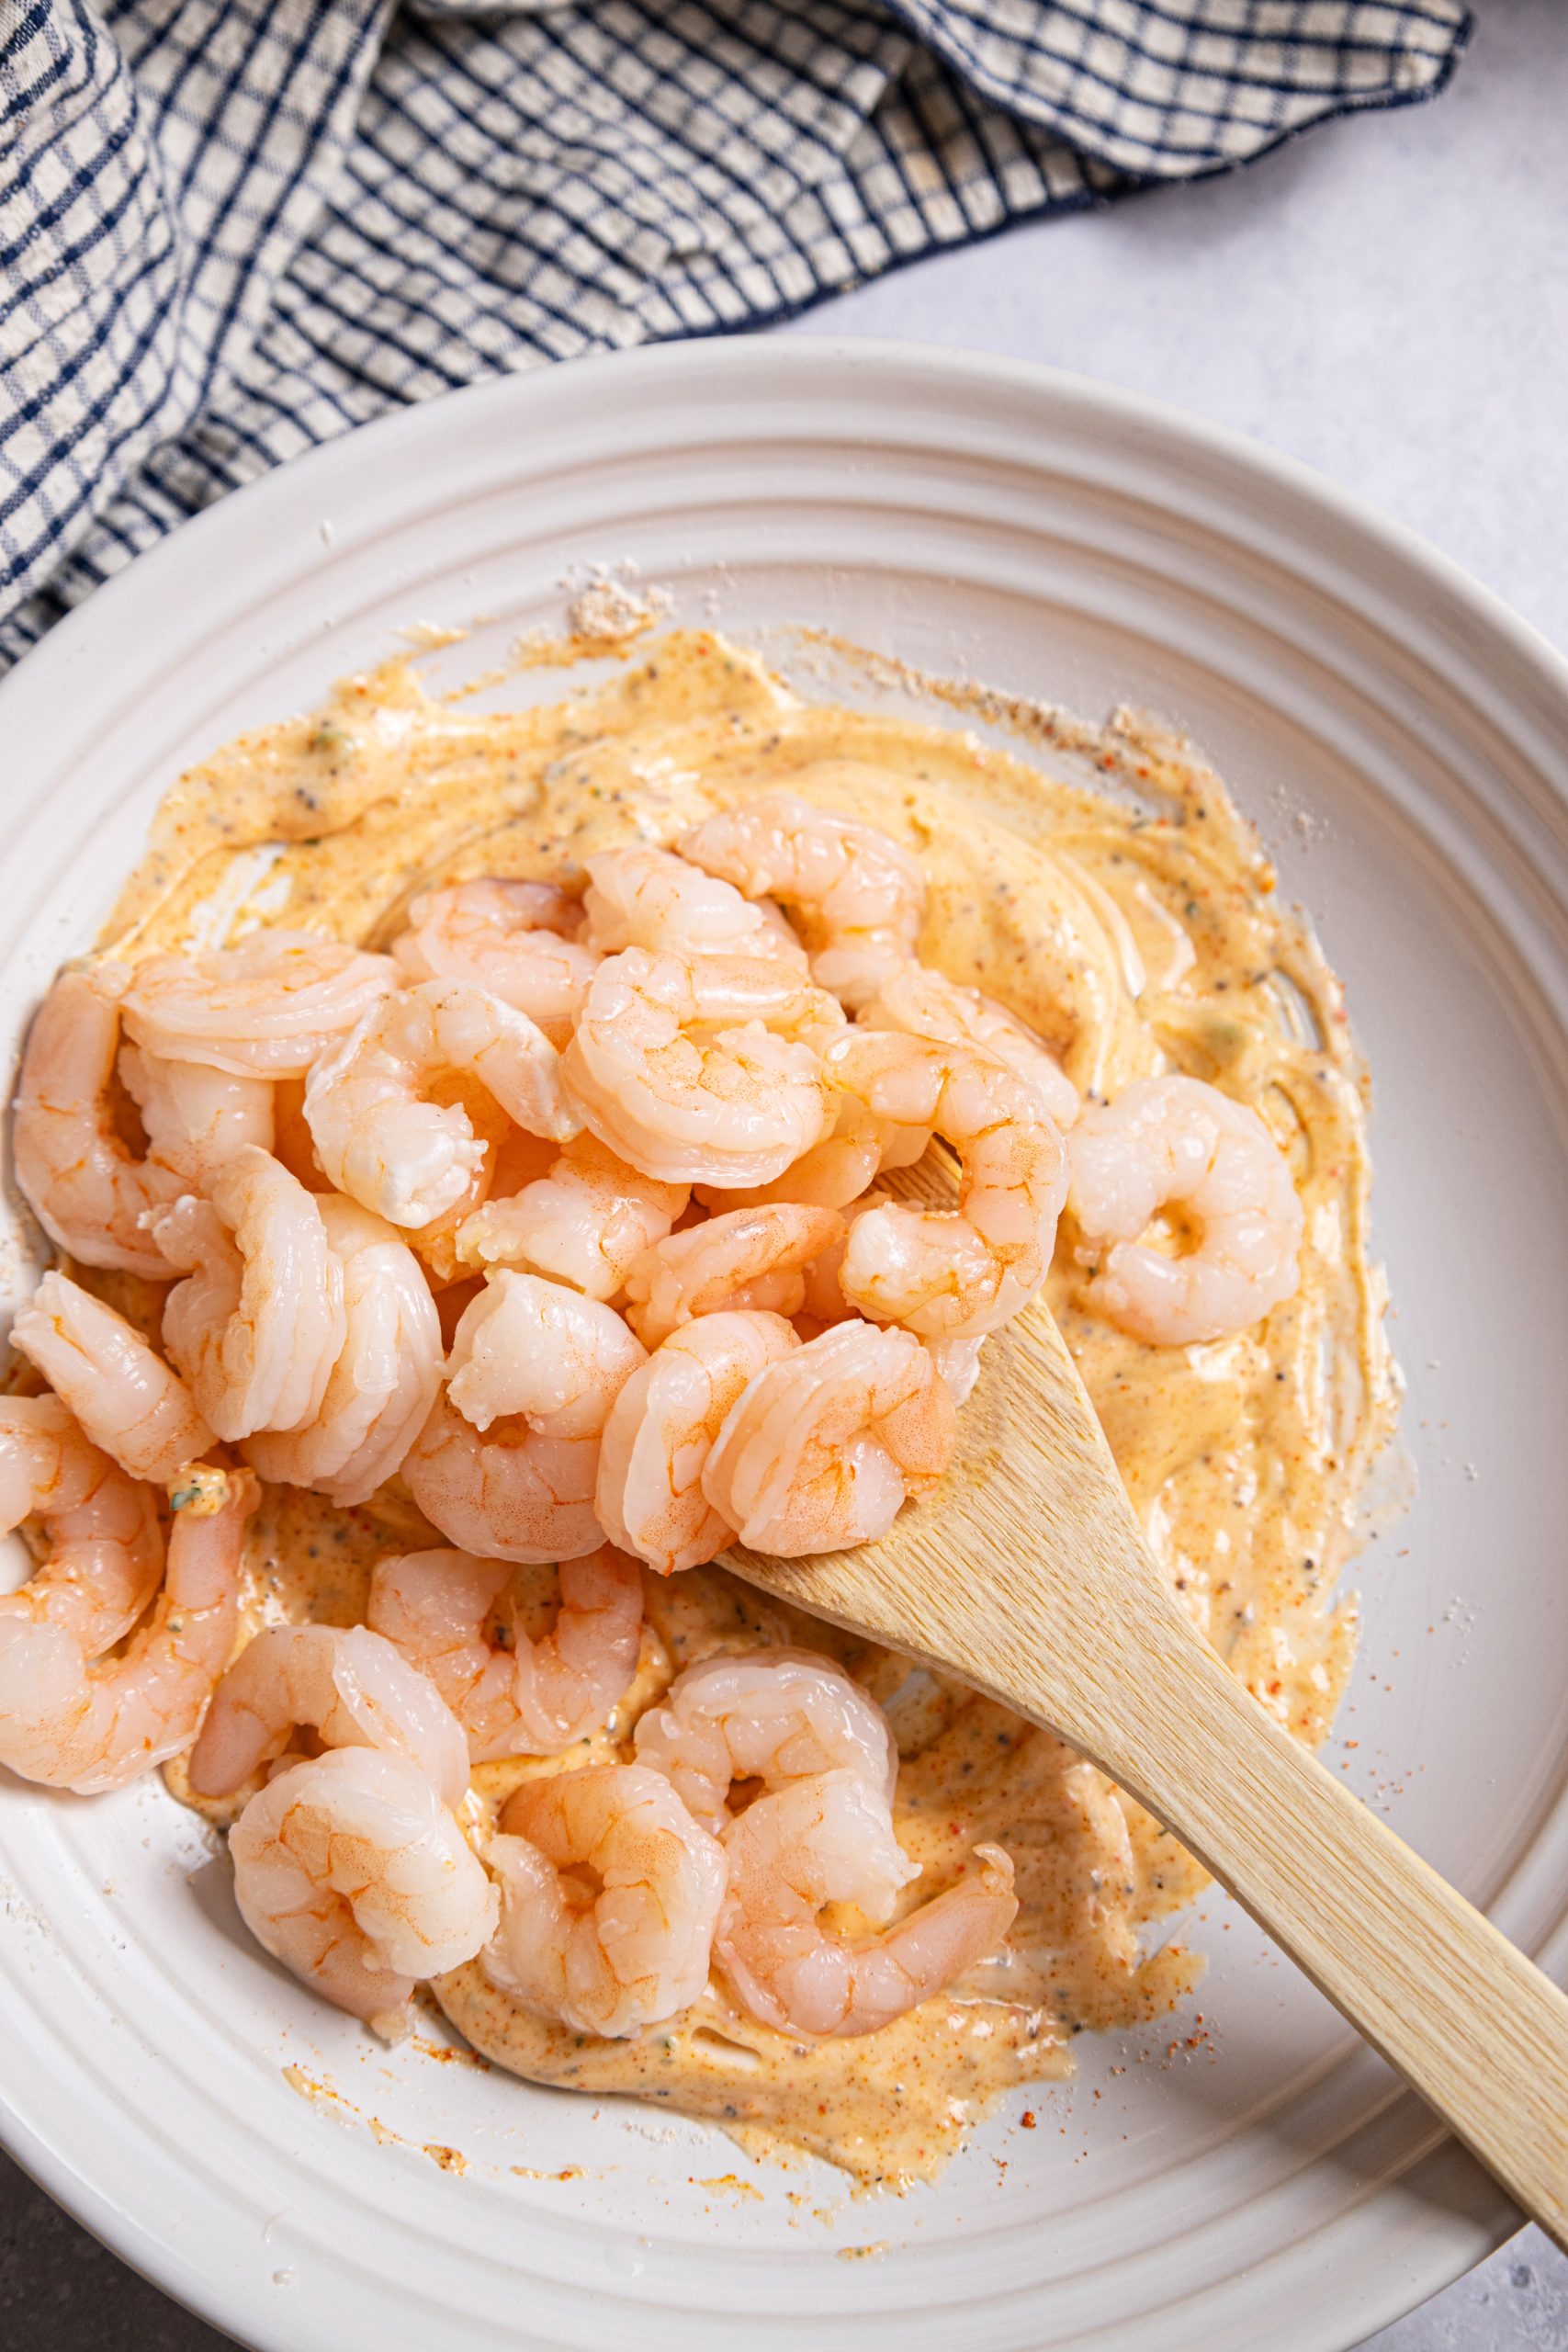 Shrimp on a white plate with a wooden spoon.